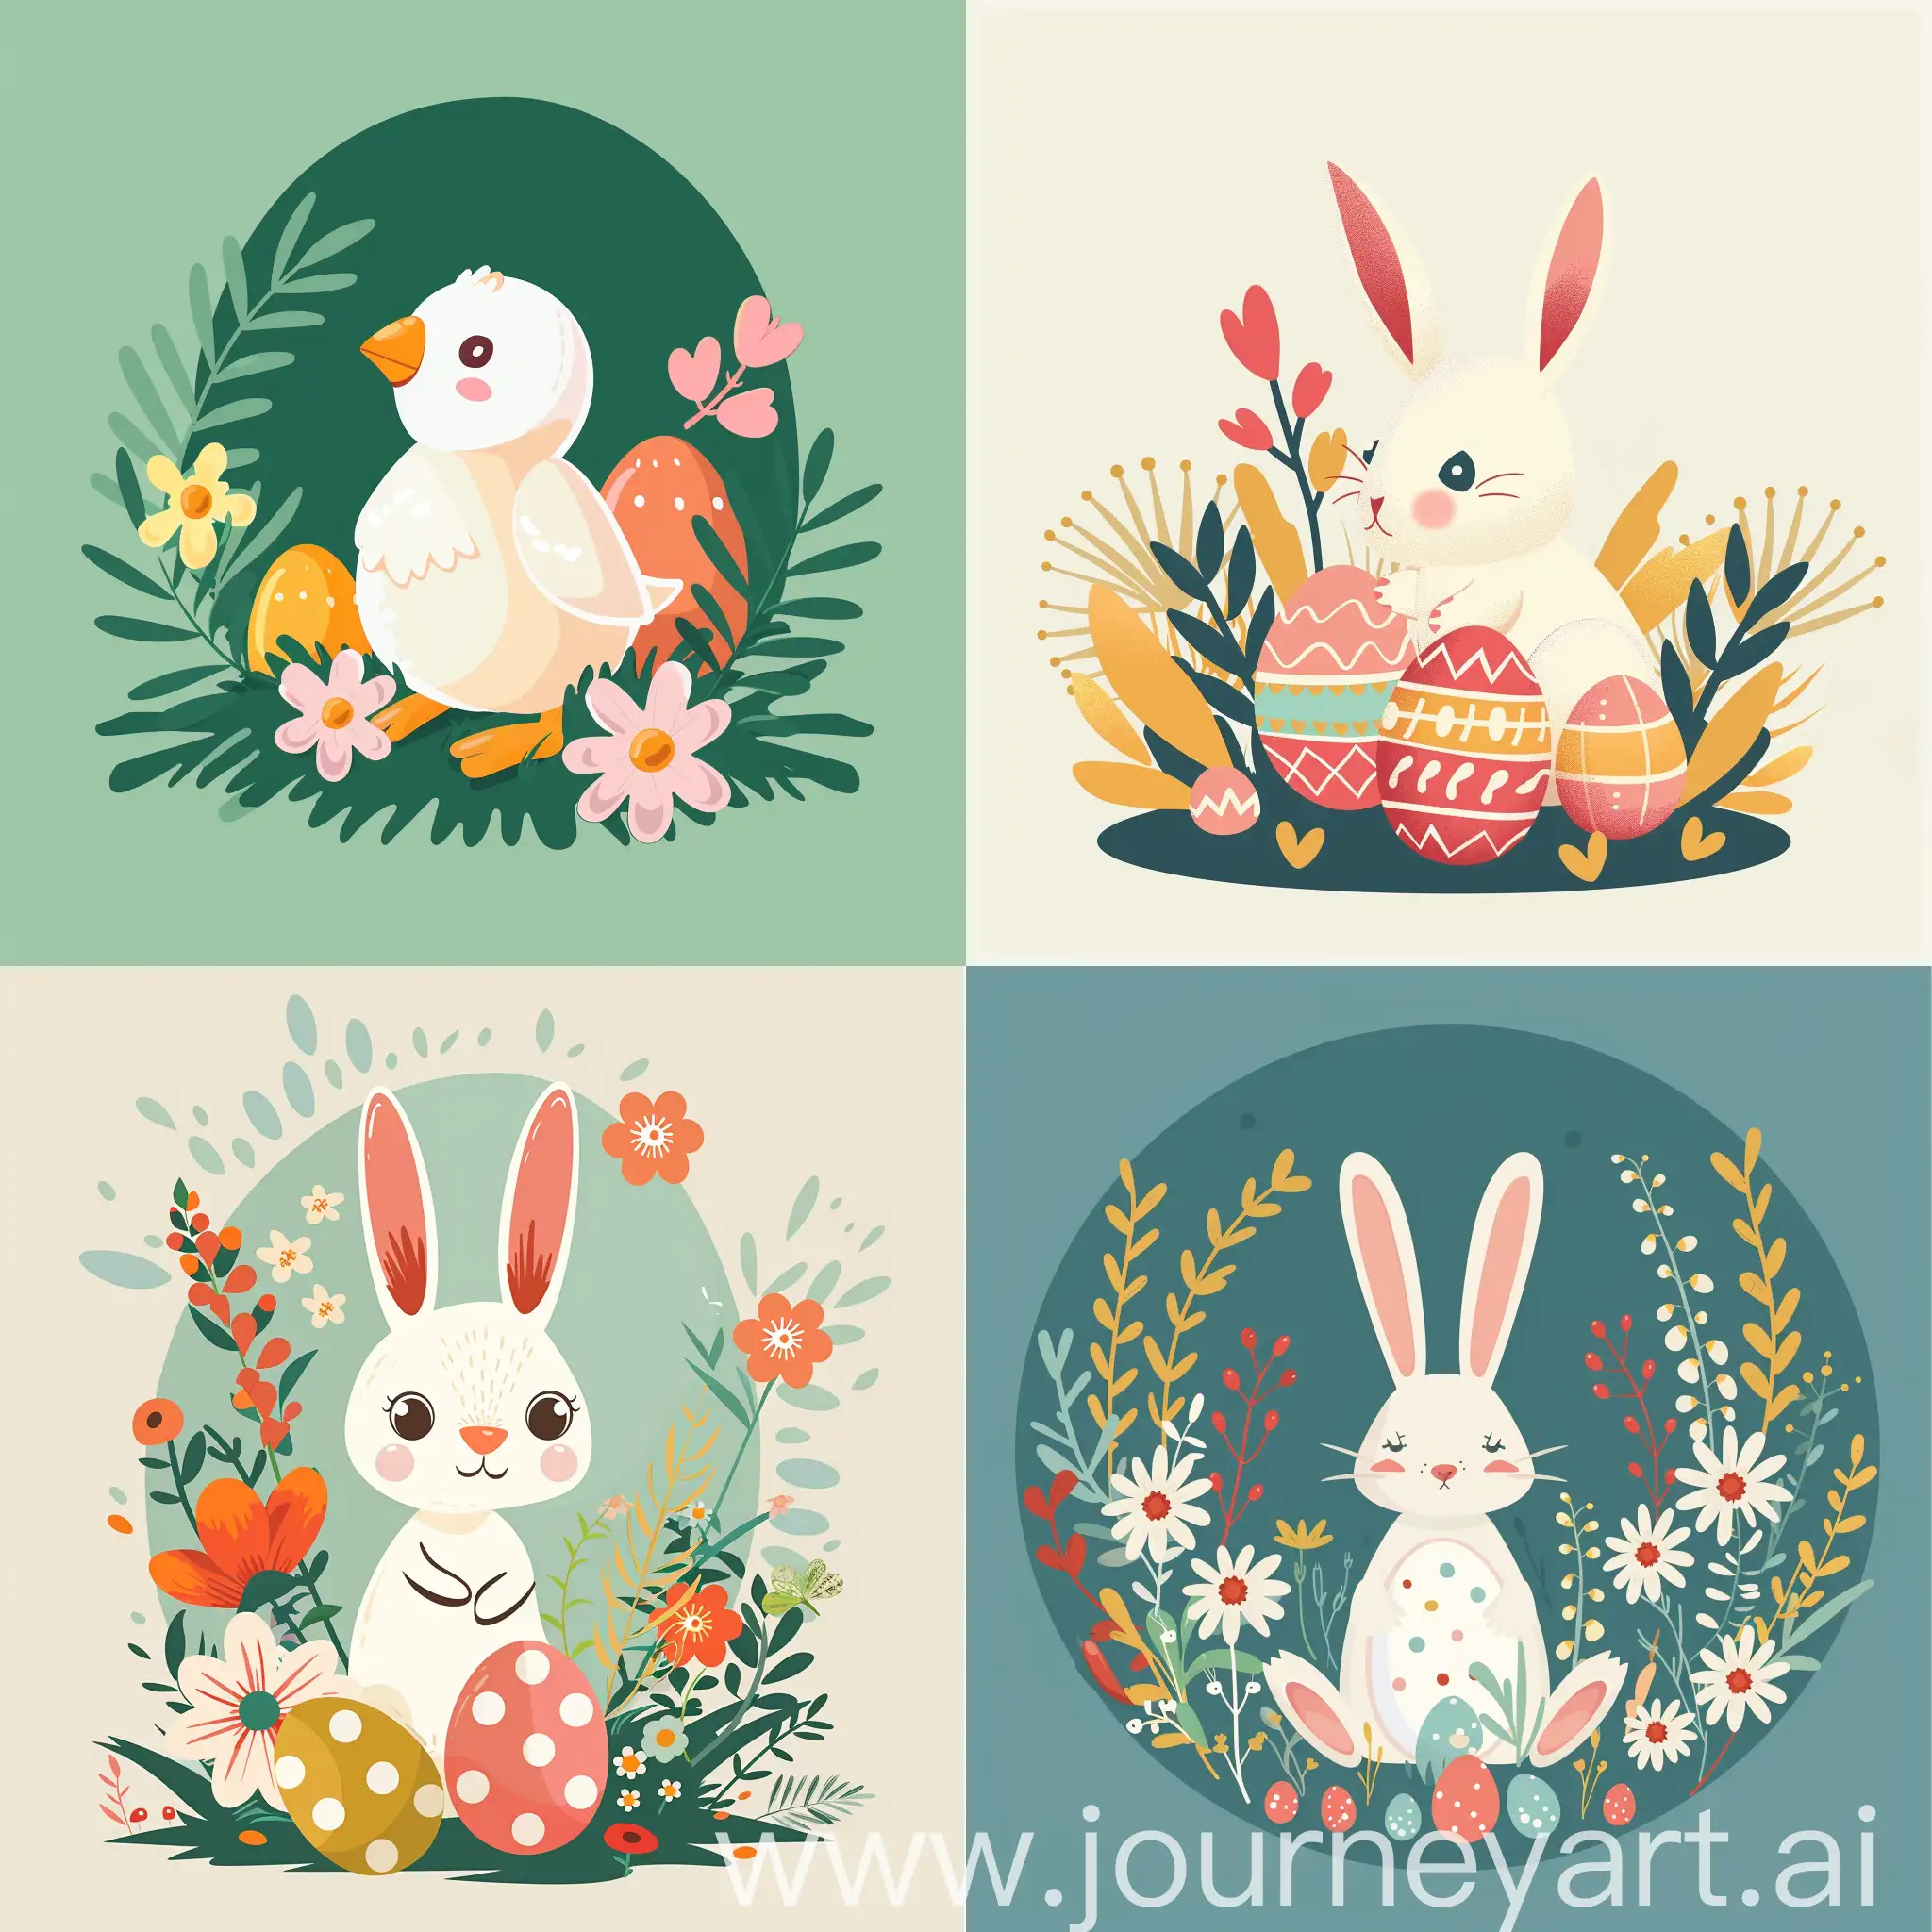 Charming-Retro-Easter-Illustration-with-Vibrant-Flat-Style